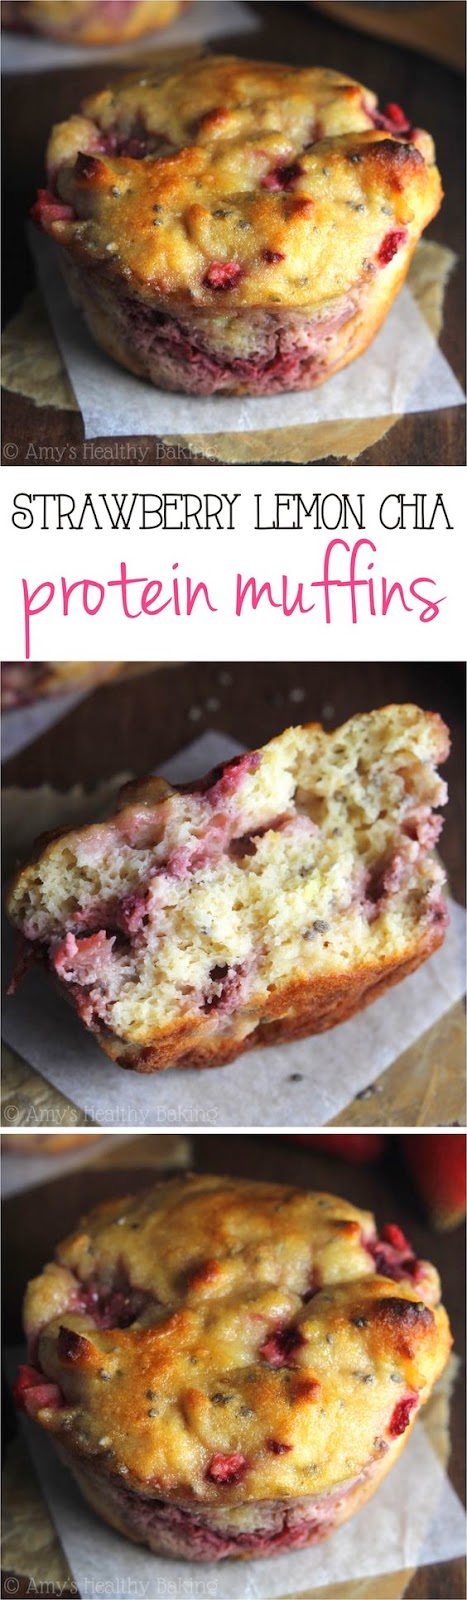 Strawberry Lemon Chia Seed Protein Muffins